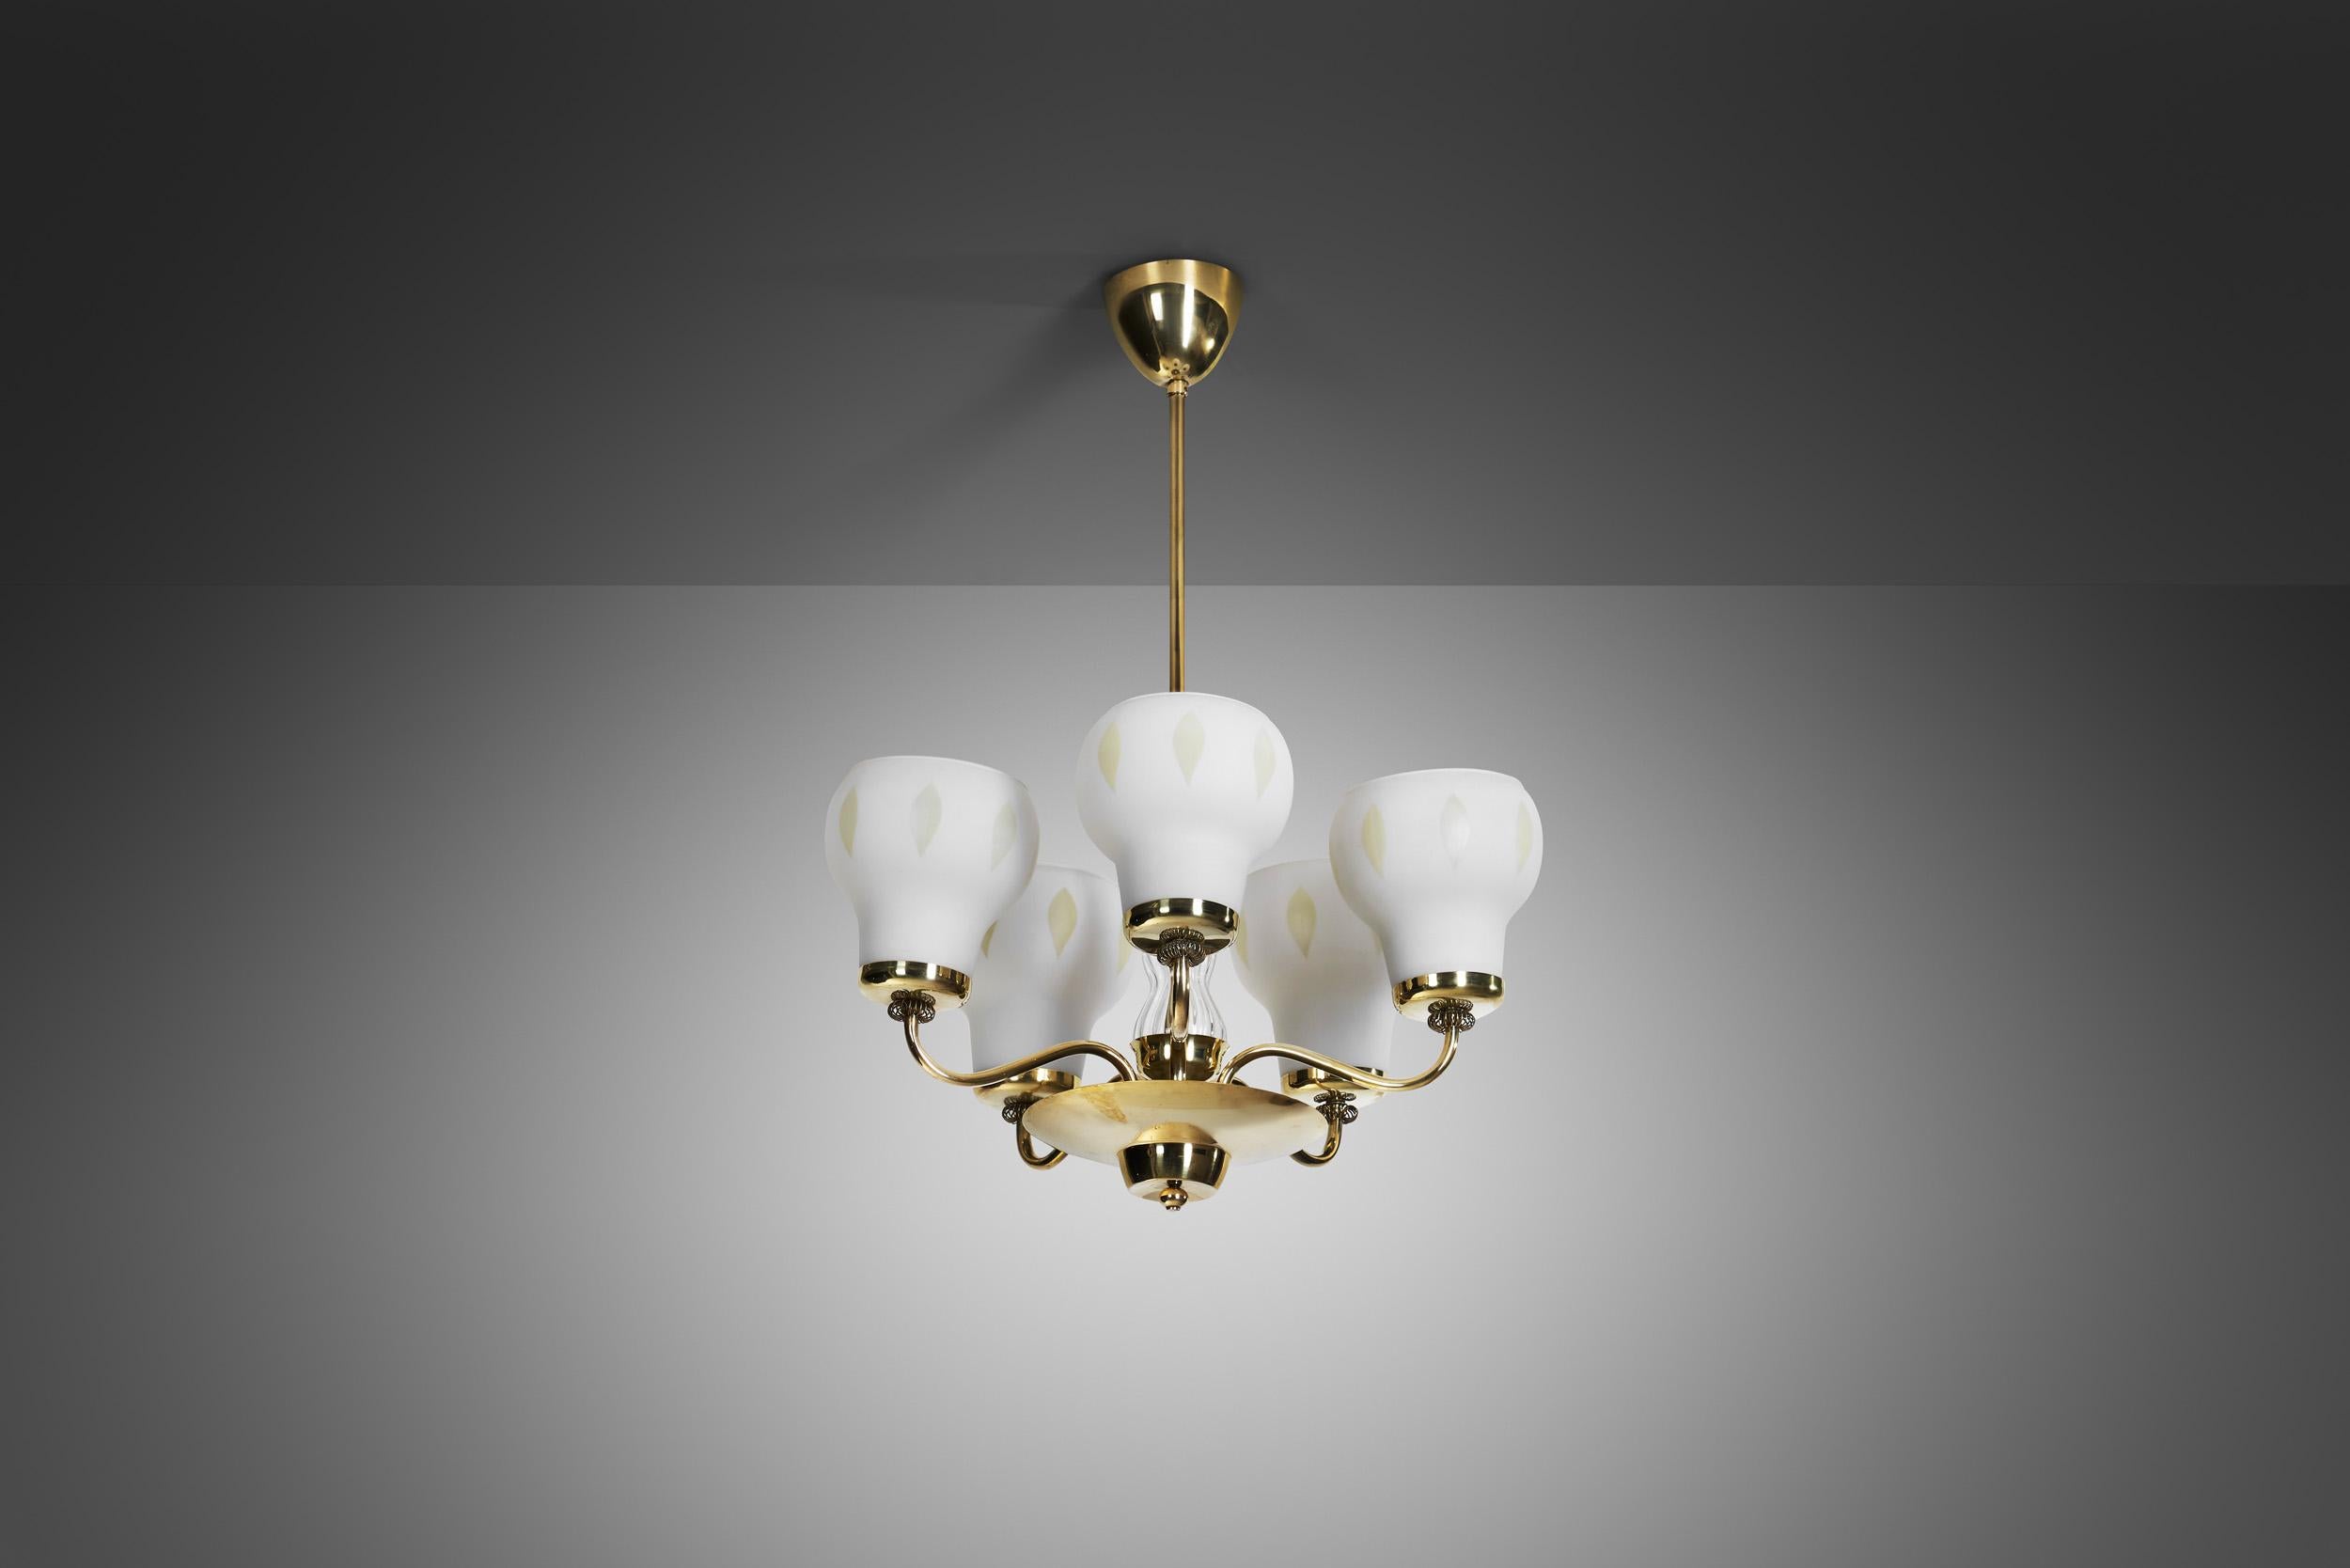 Mid-20th Century Finnish Brass and Opal Glass Chandelier by Saariston Valaisin, Finland ca 1950s For Sale